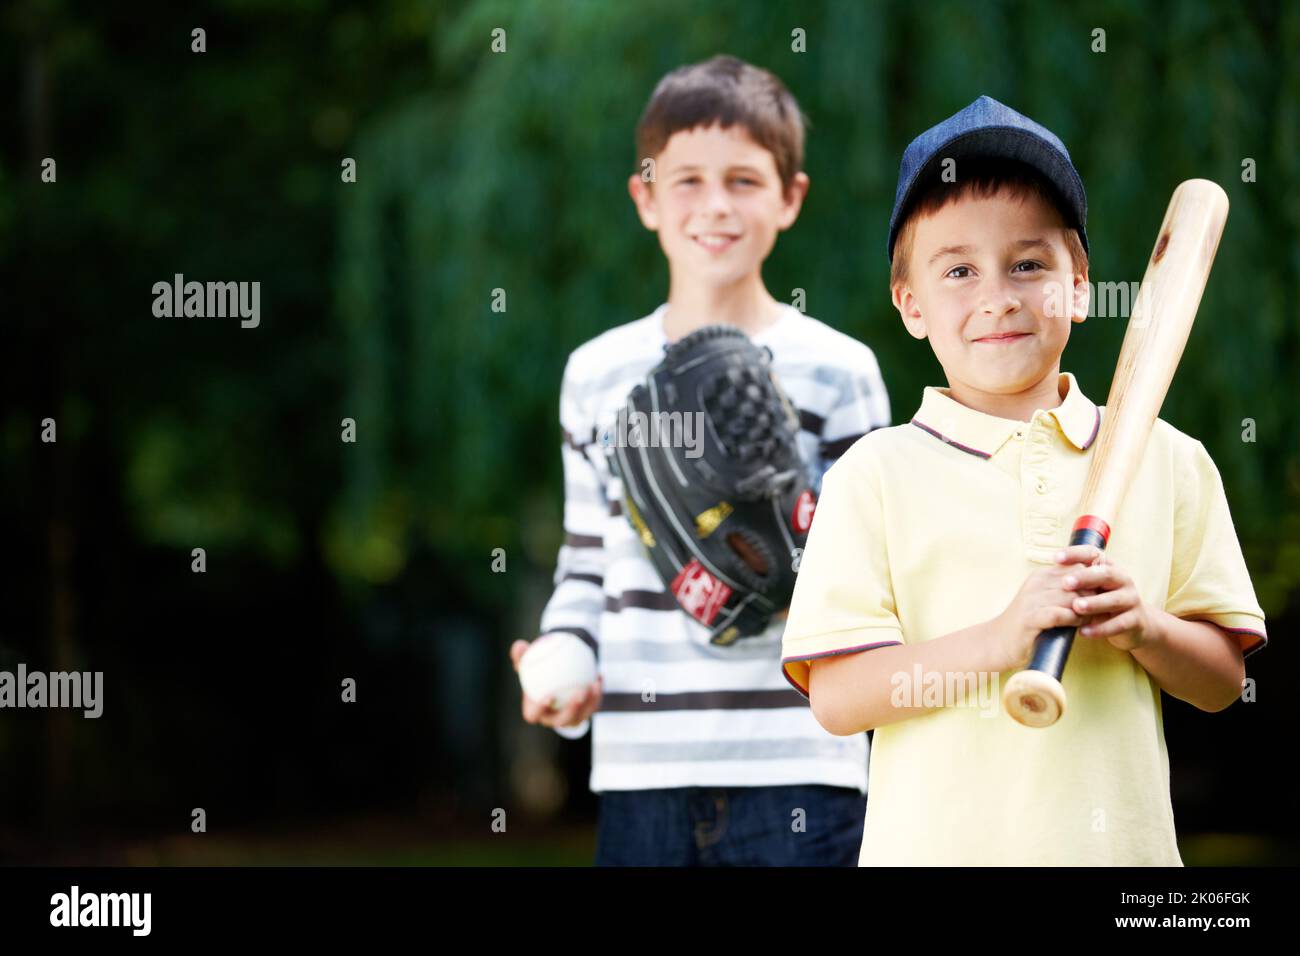 Im gonna hit a home run. Two young boys smiling happily after an energetic game of baseball in the park - Copyspace. Stock Photo